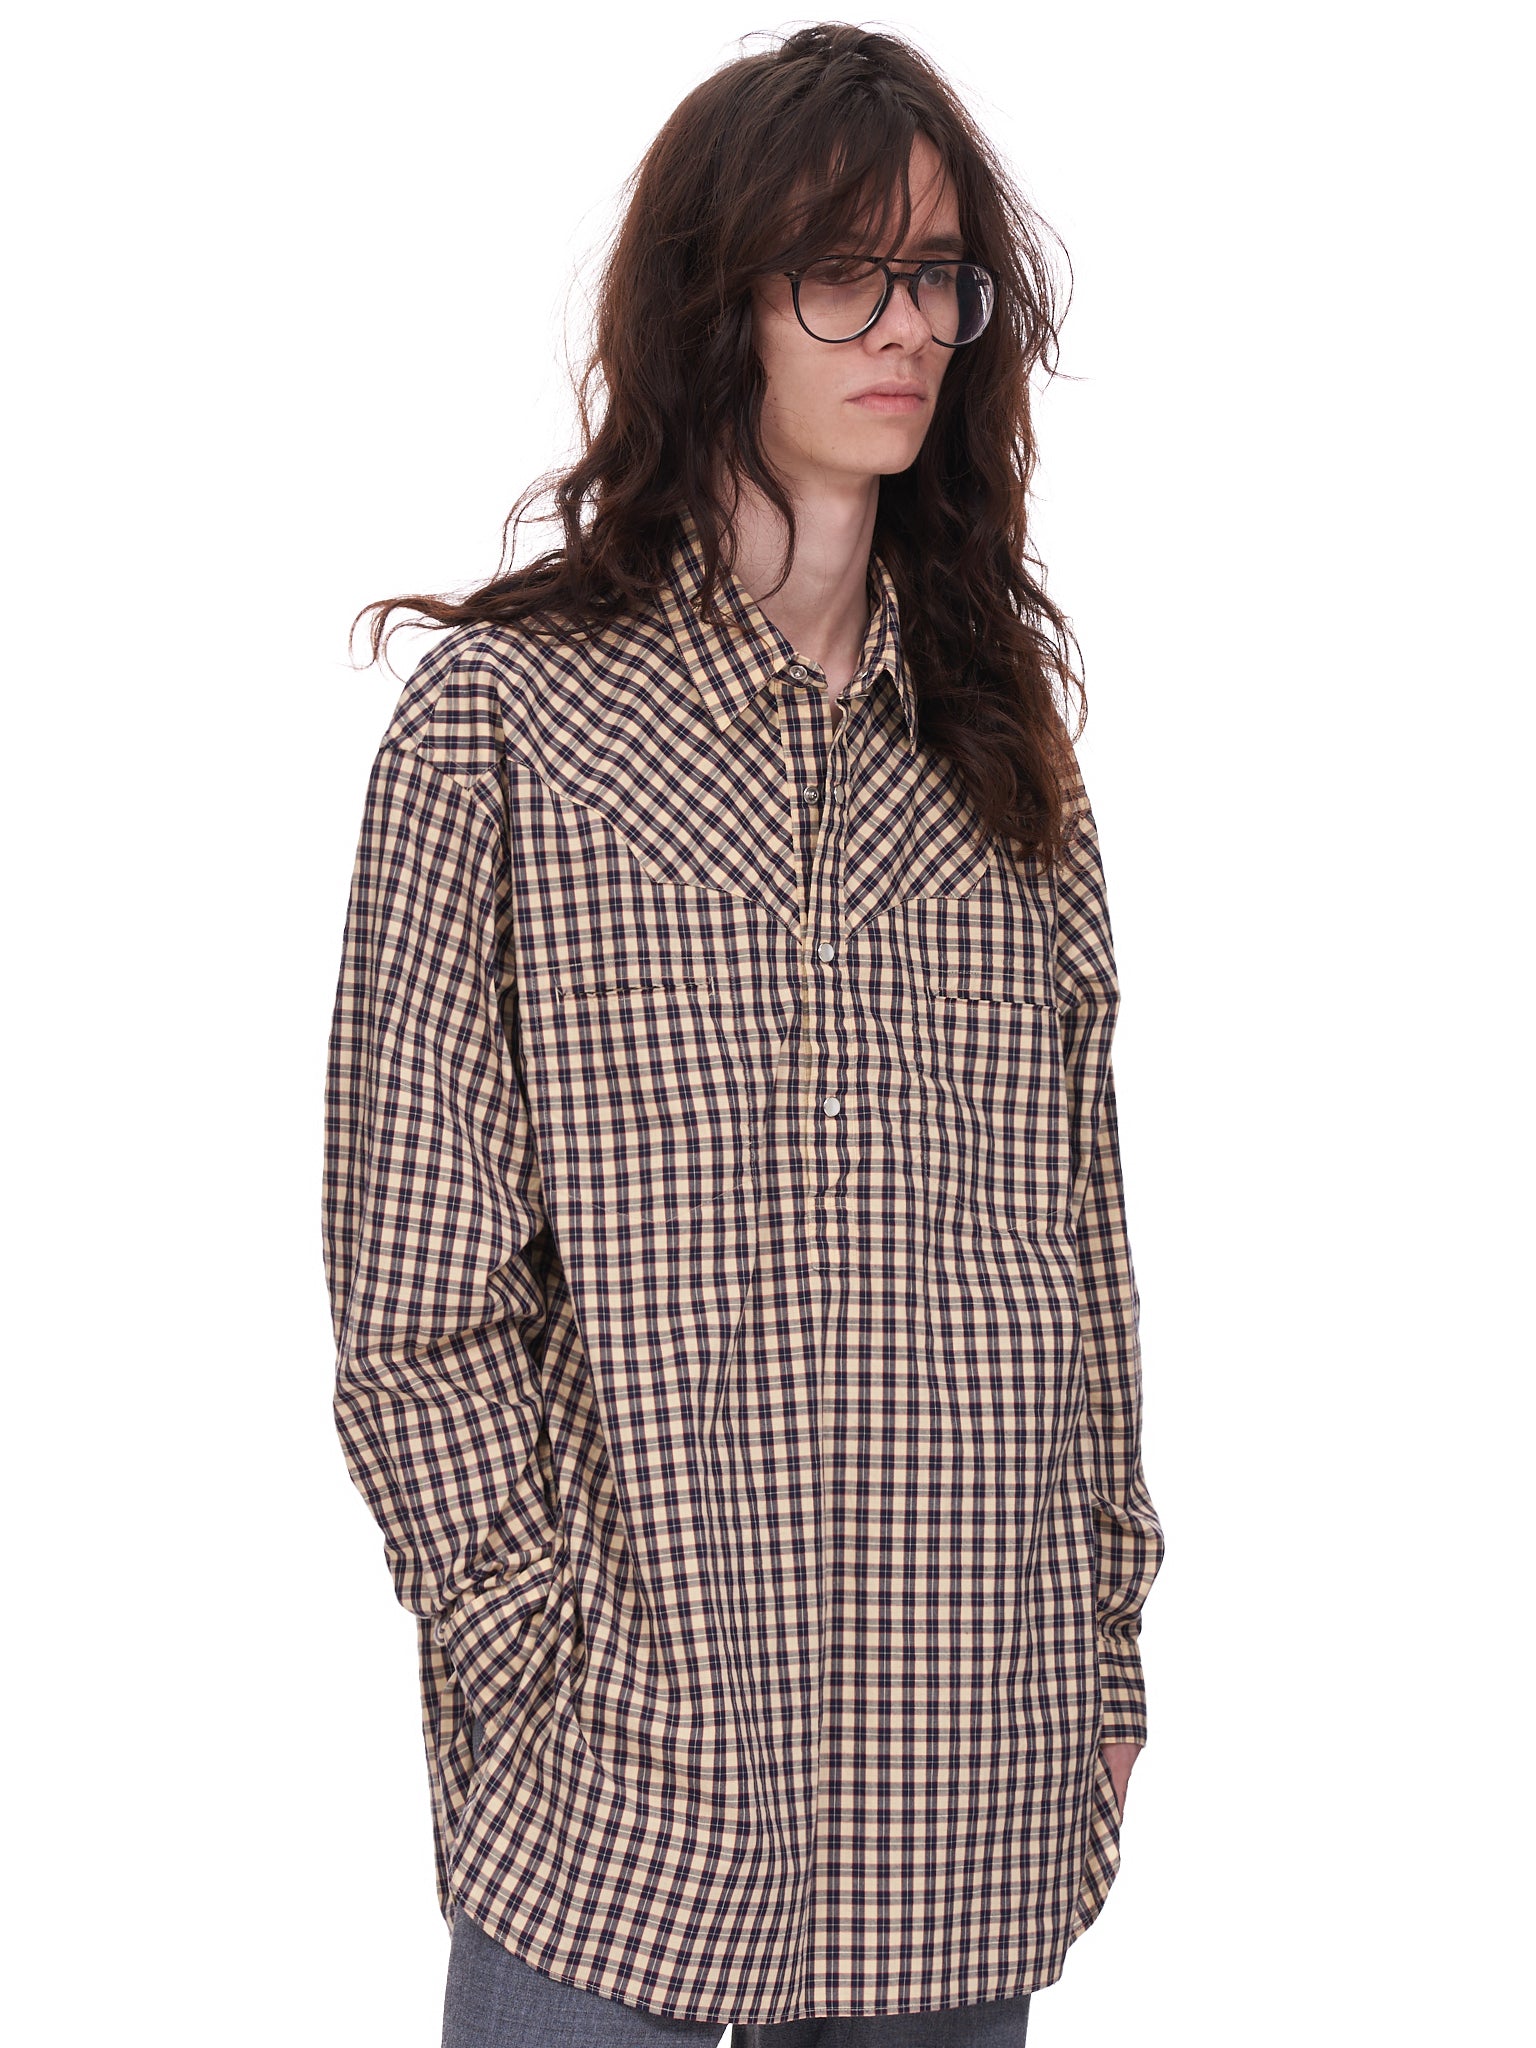 Undercover Plaid Top | H. Lorenzo - side 2